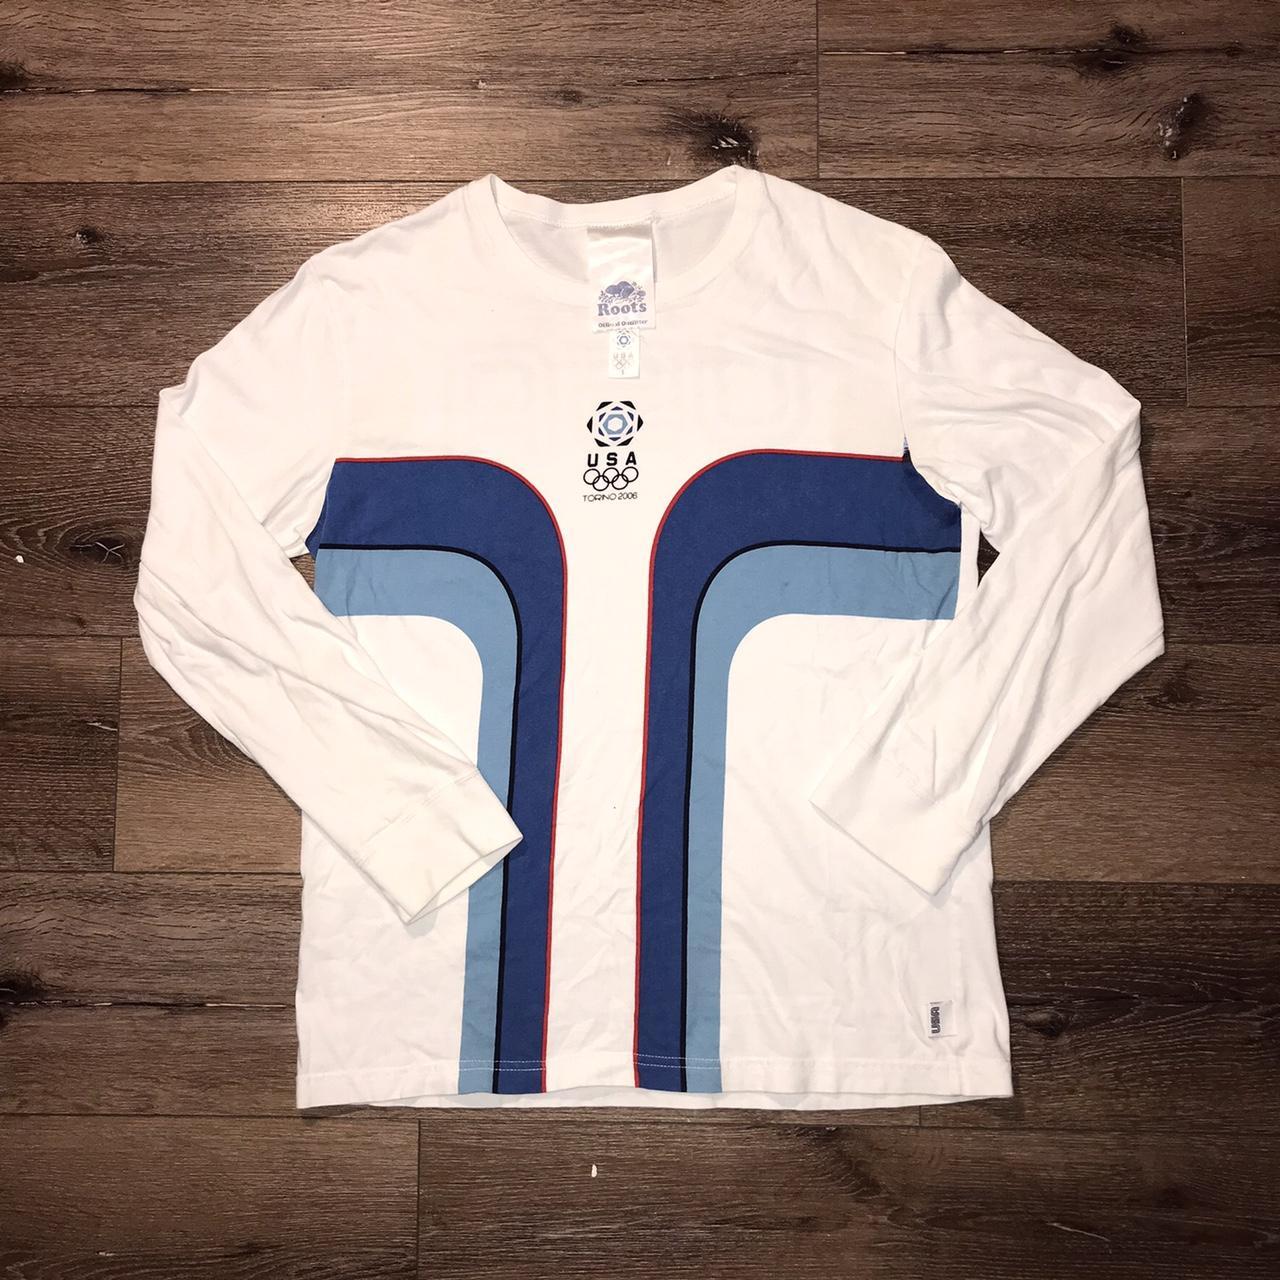 Roots Men's White and Blue T-shirt | Depop